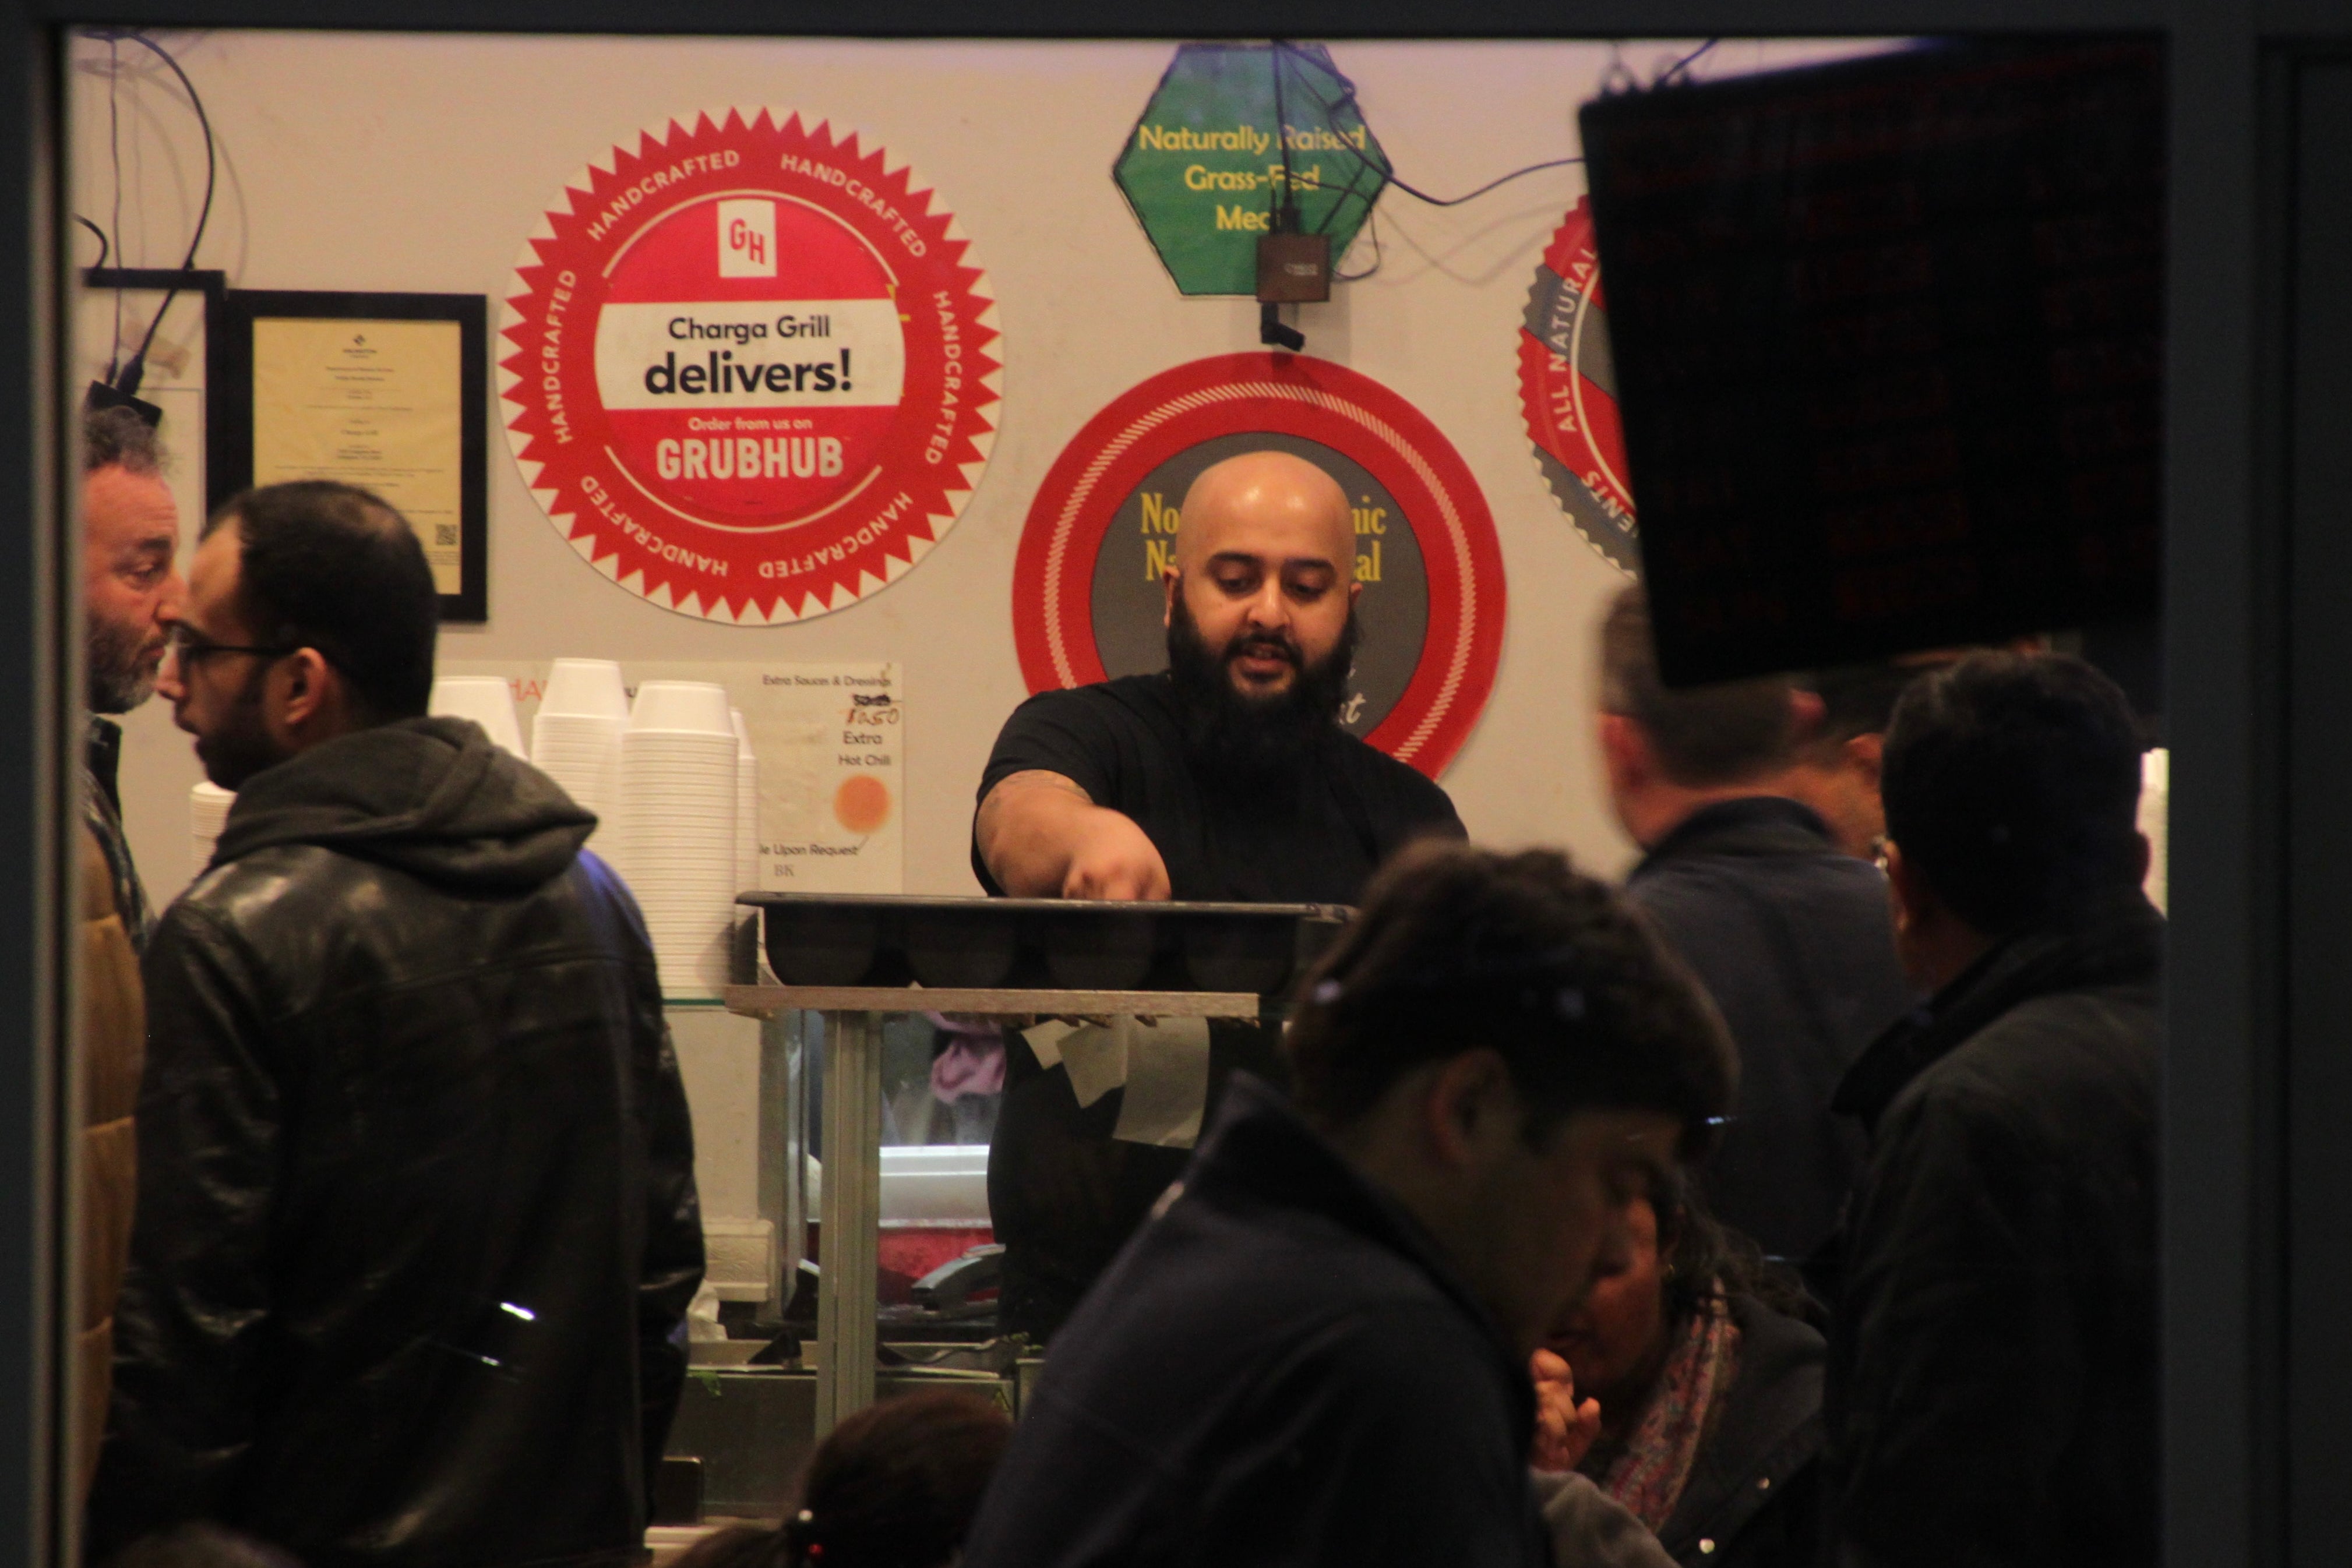 A bald man with a beard stands behind the counter in a packed restaurant.